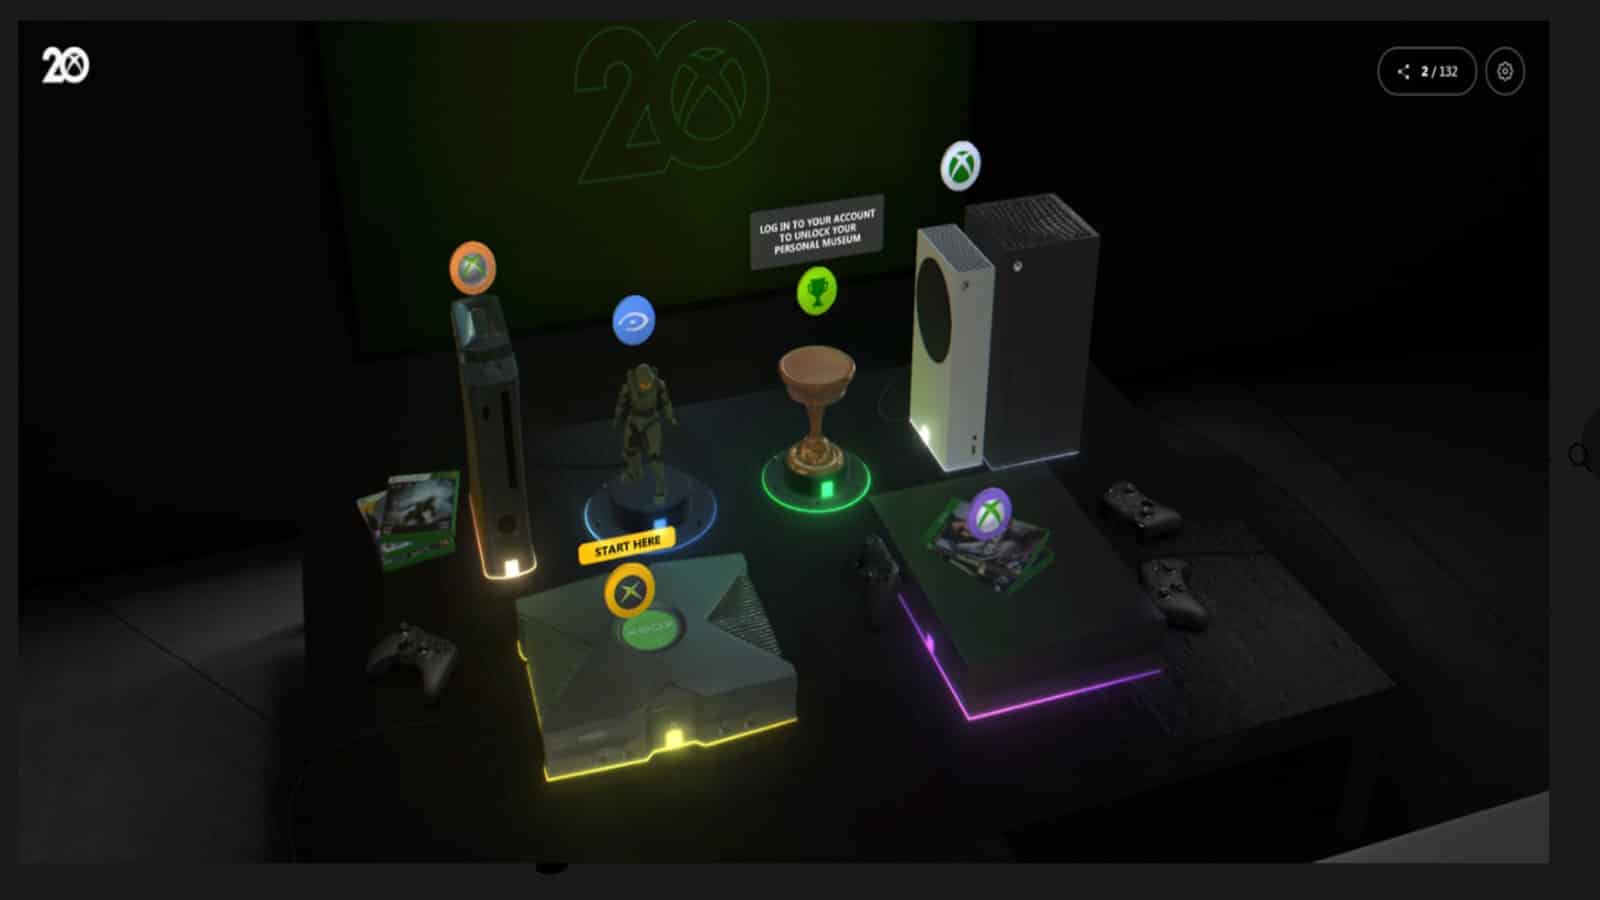 The user-exhibit display in the virtual Xbox Museum